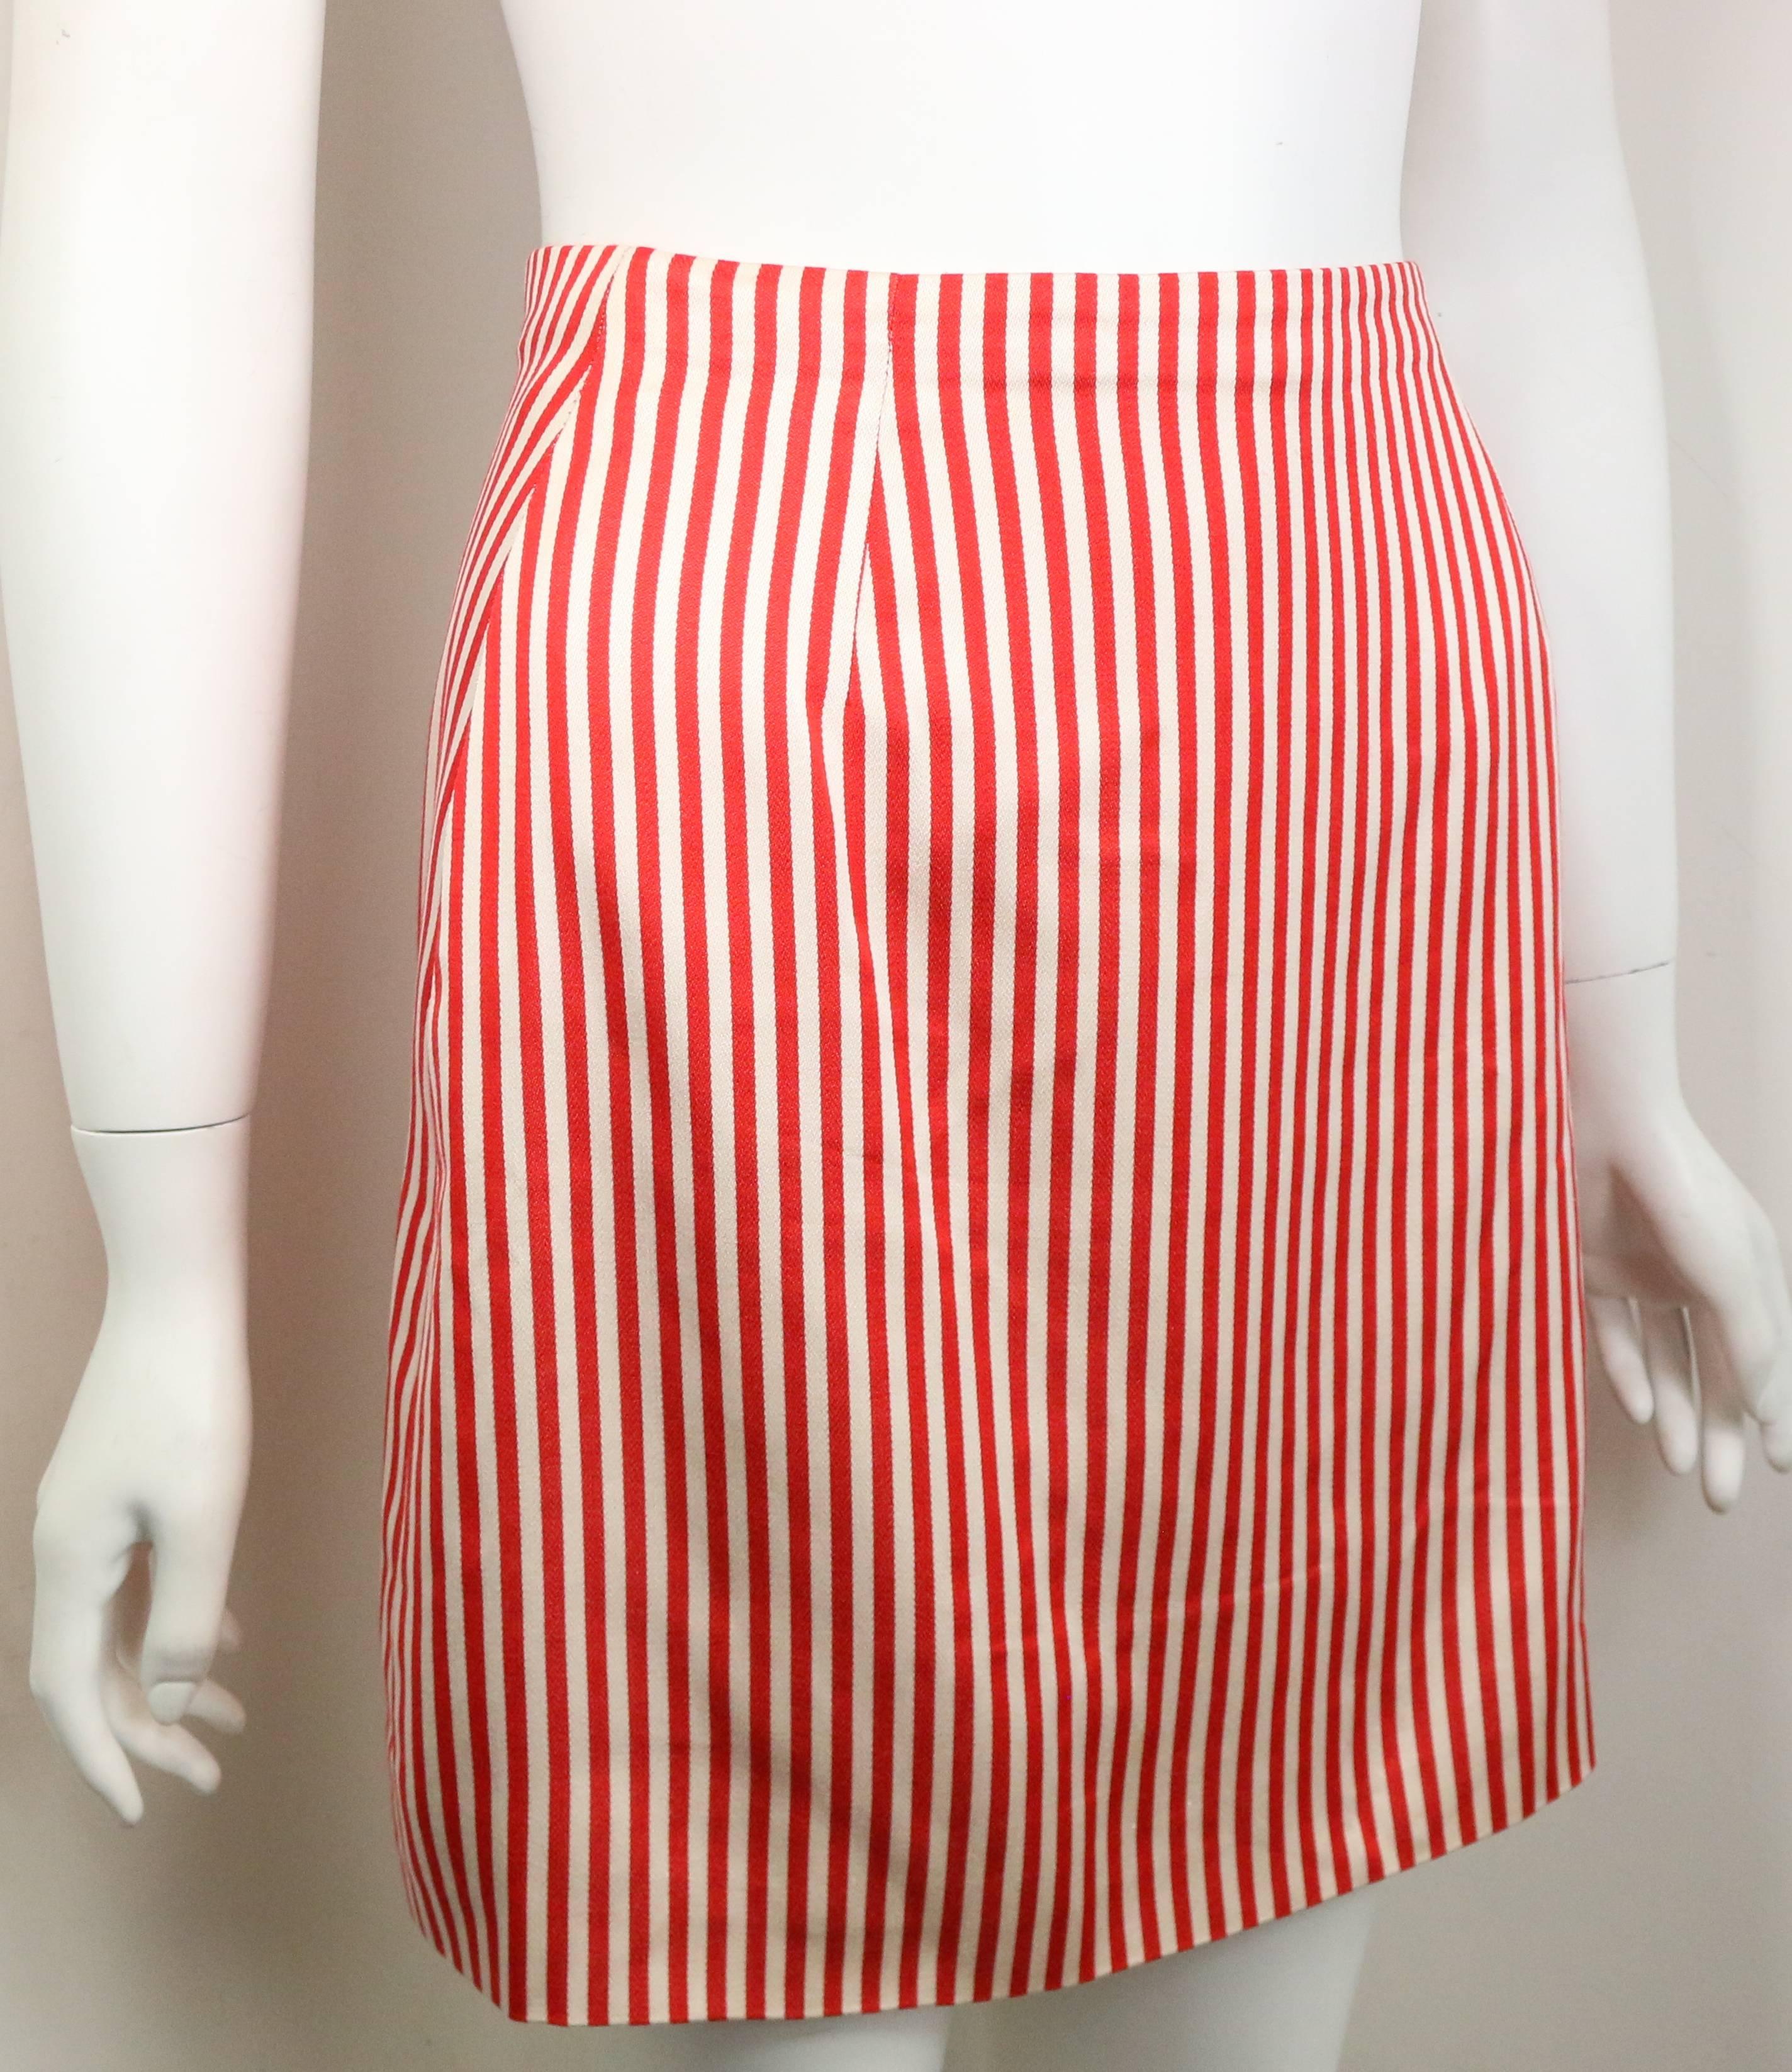 Orange Gianni Versace Couture Red and White Stripe Silk Jacket and Skirt Ensemble